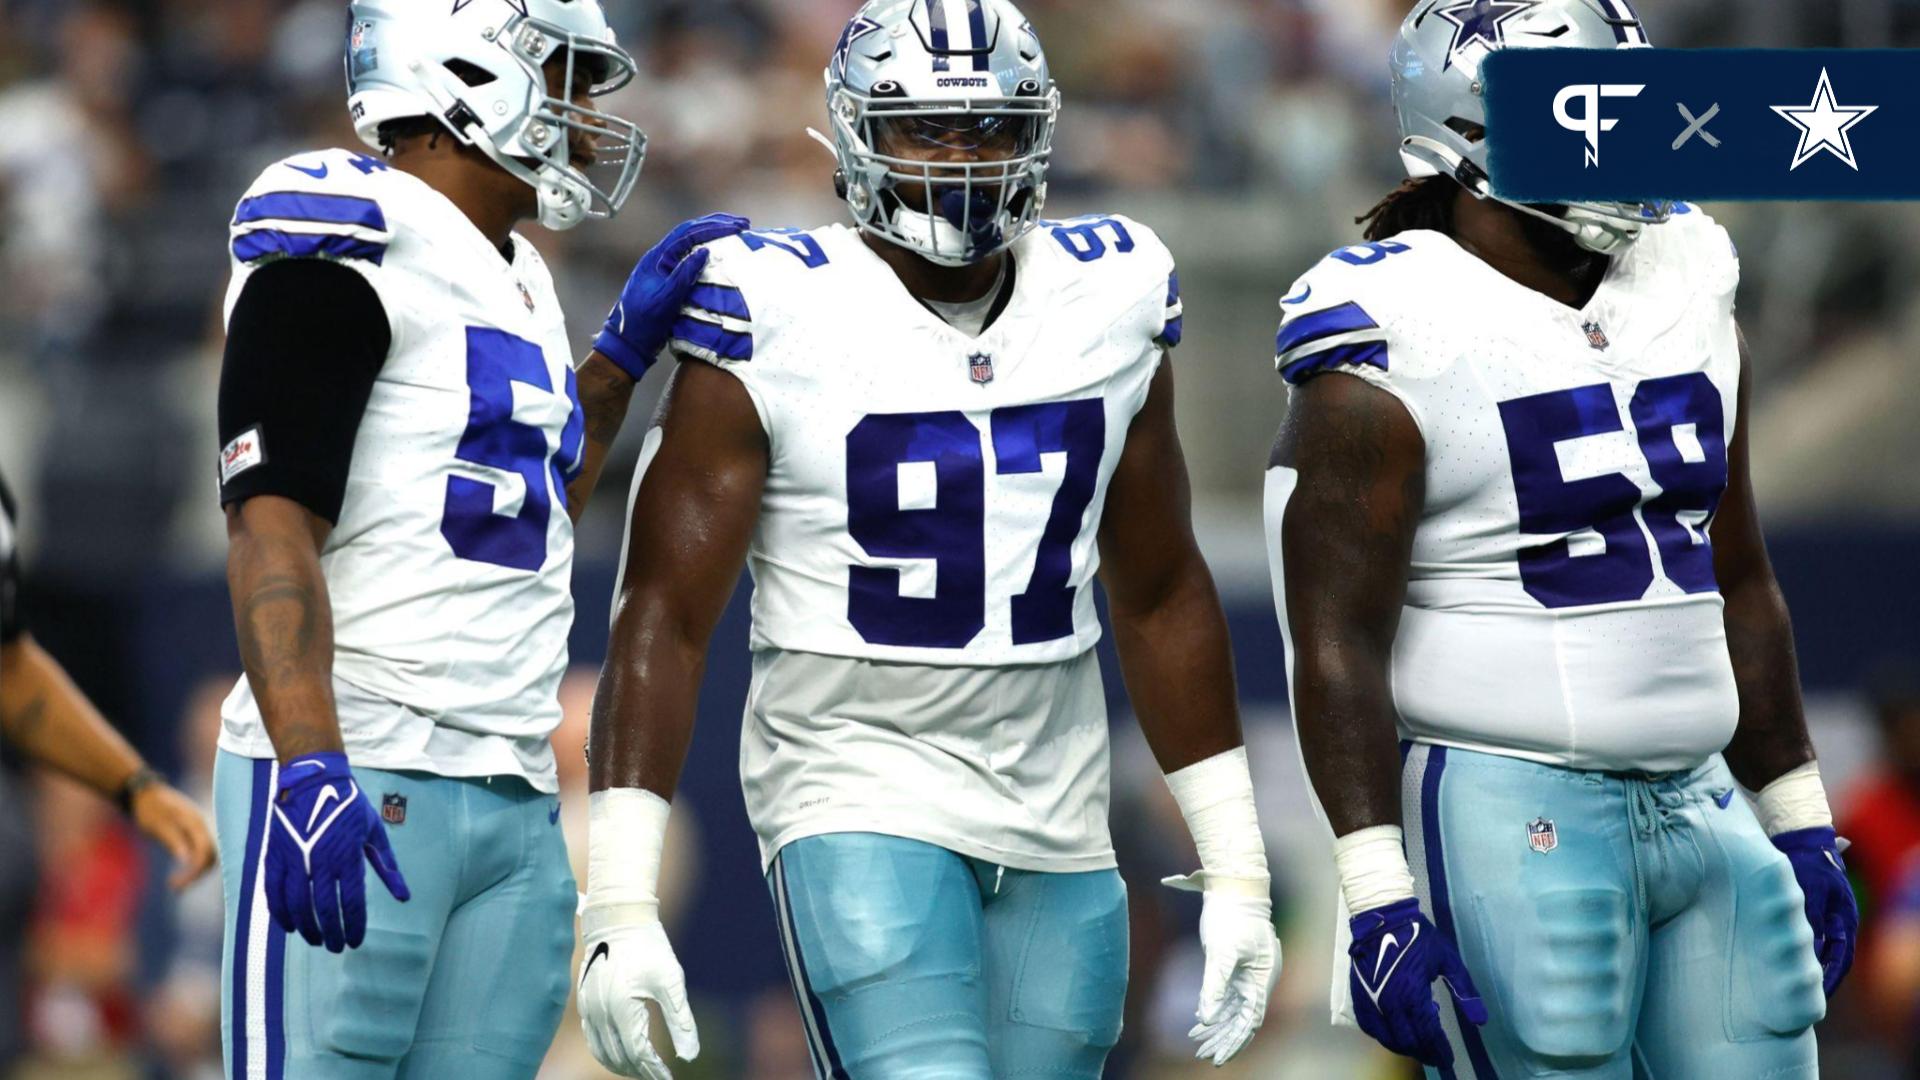 Dallas Cowboys defensive tackle Osa Odighizuwa (97) and defensive tackle Mazi Smith (58) on the field in the game against the Jacksonville Jaguars at AT&T Stadium.